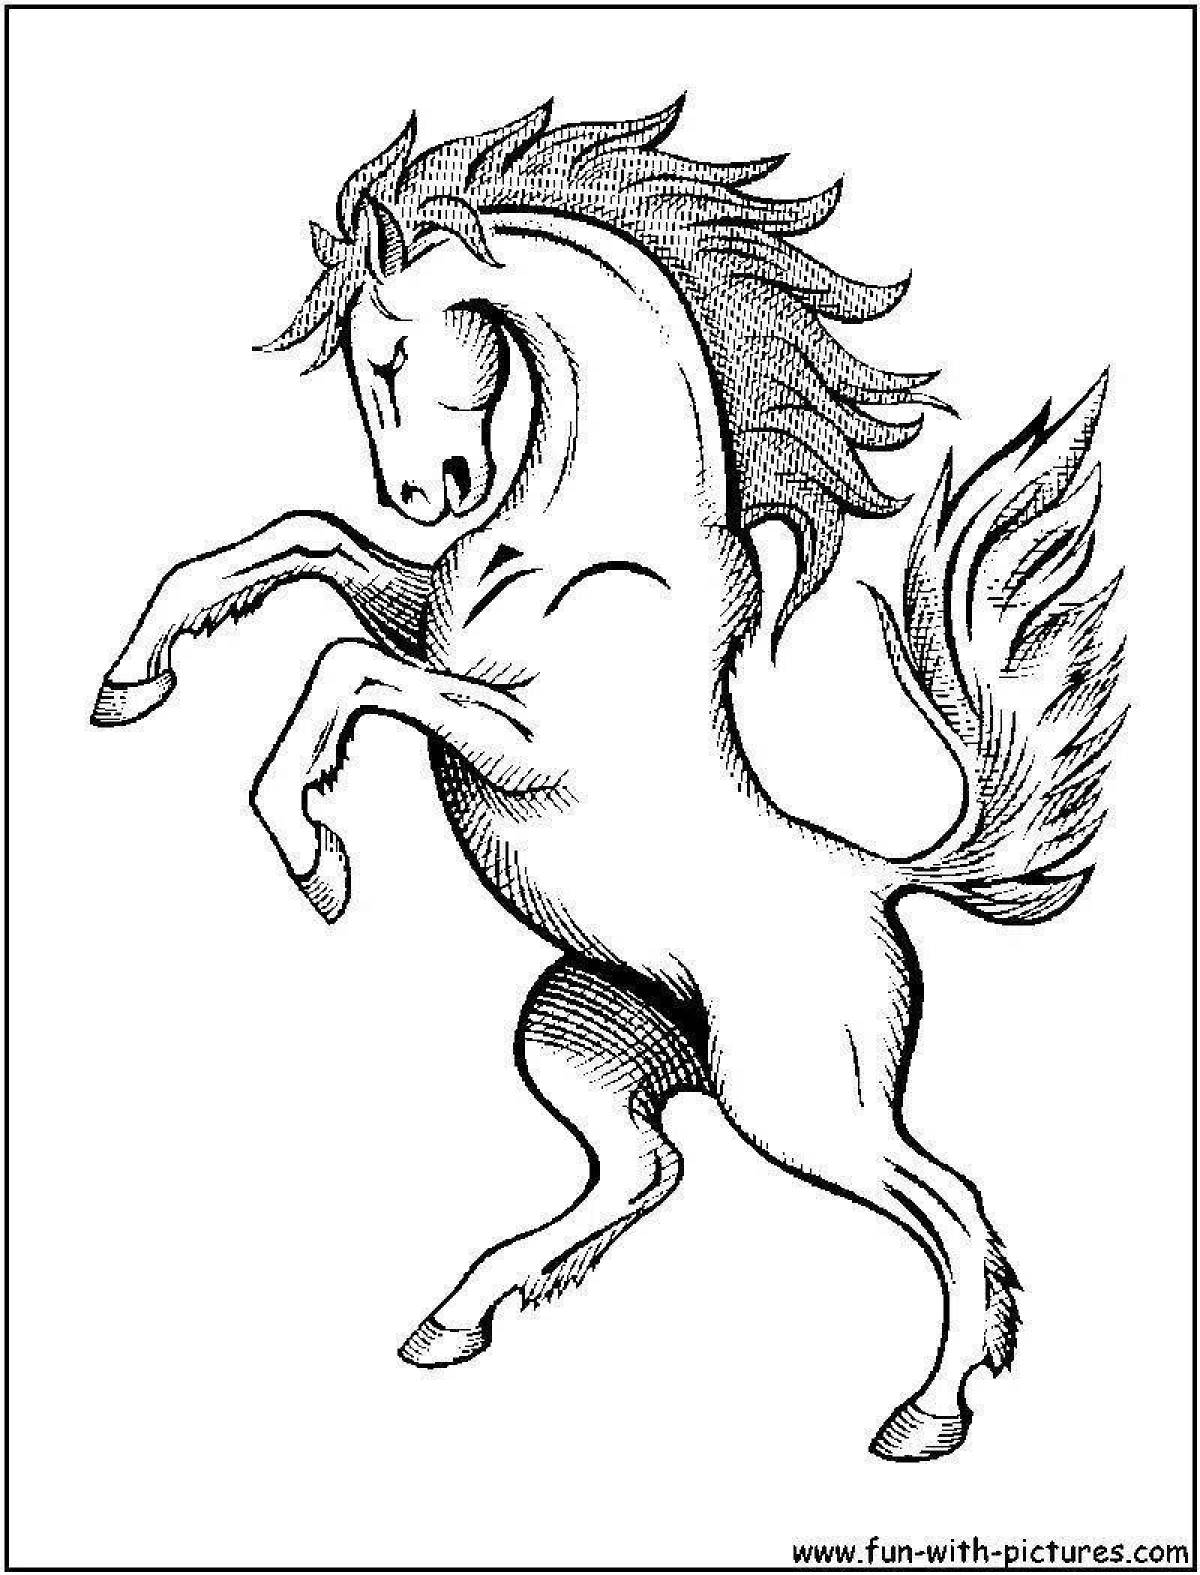 Exquisite rearing horse coloring page